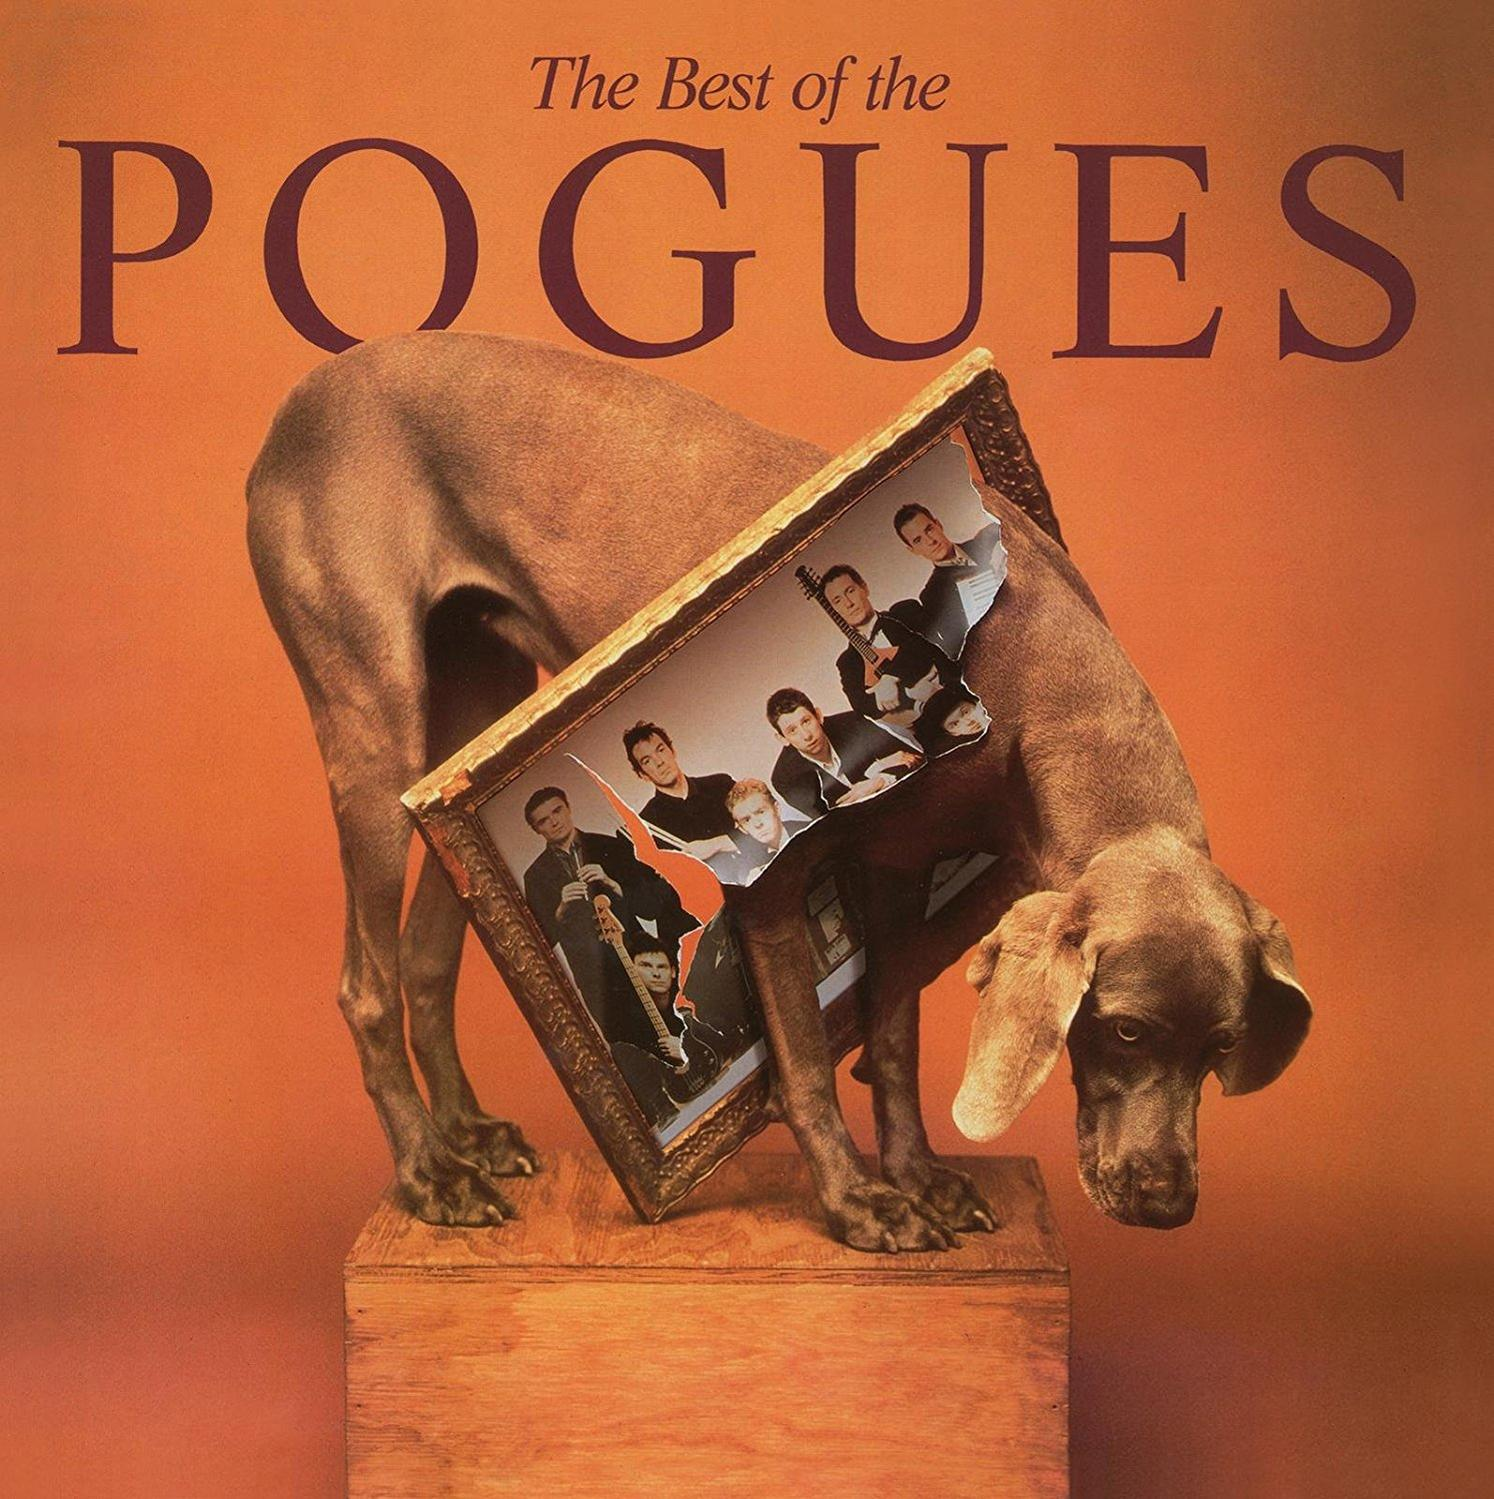 The Pogues - The Best - (Vinyl) of The Pogues